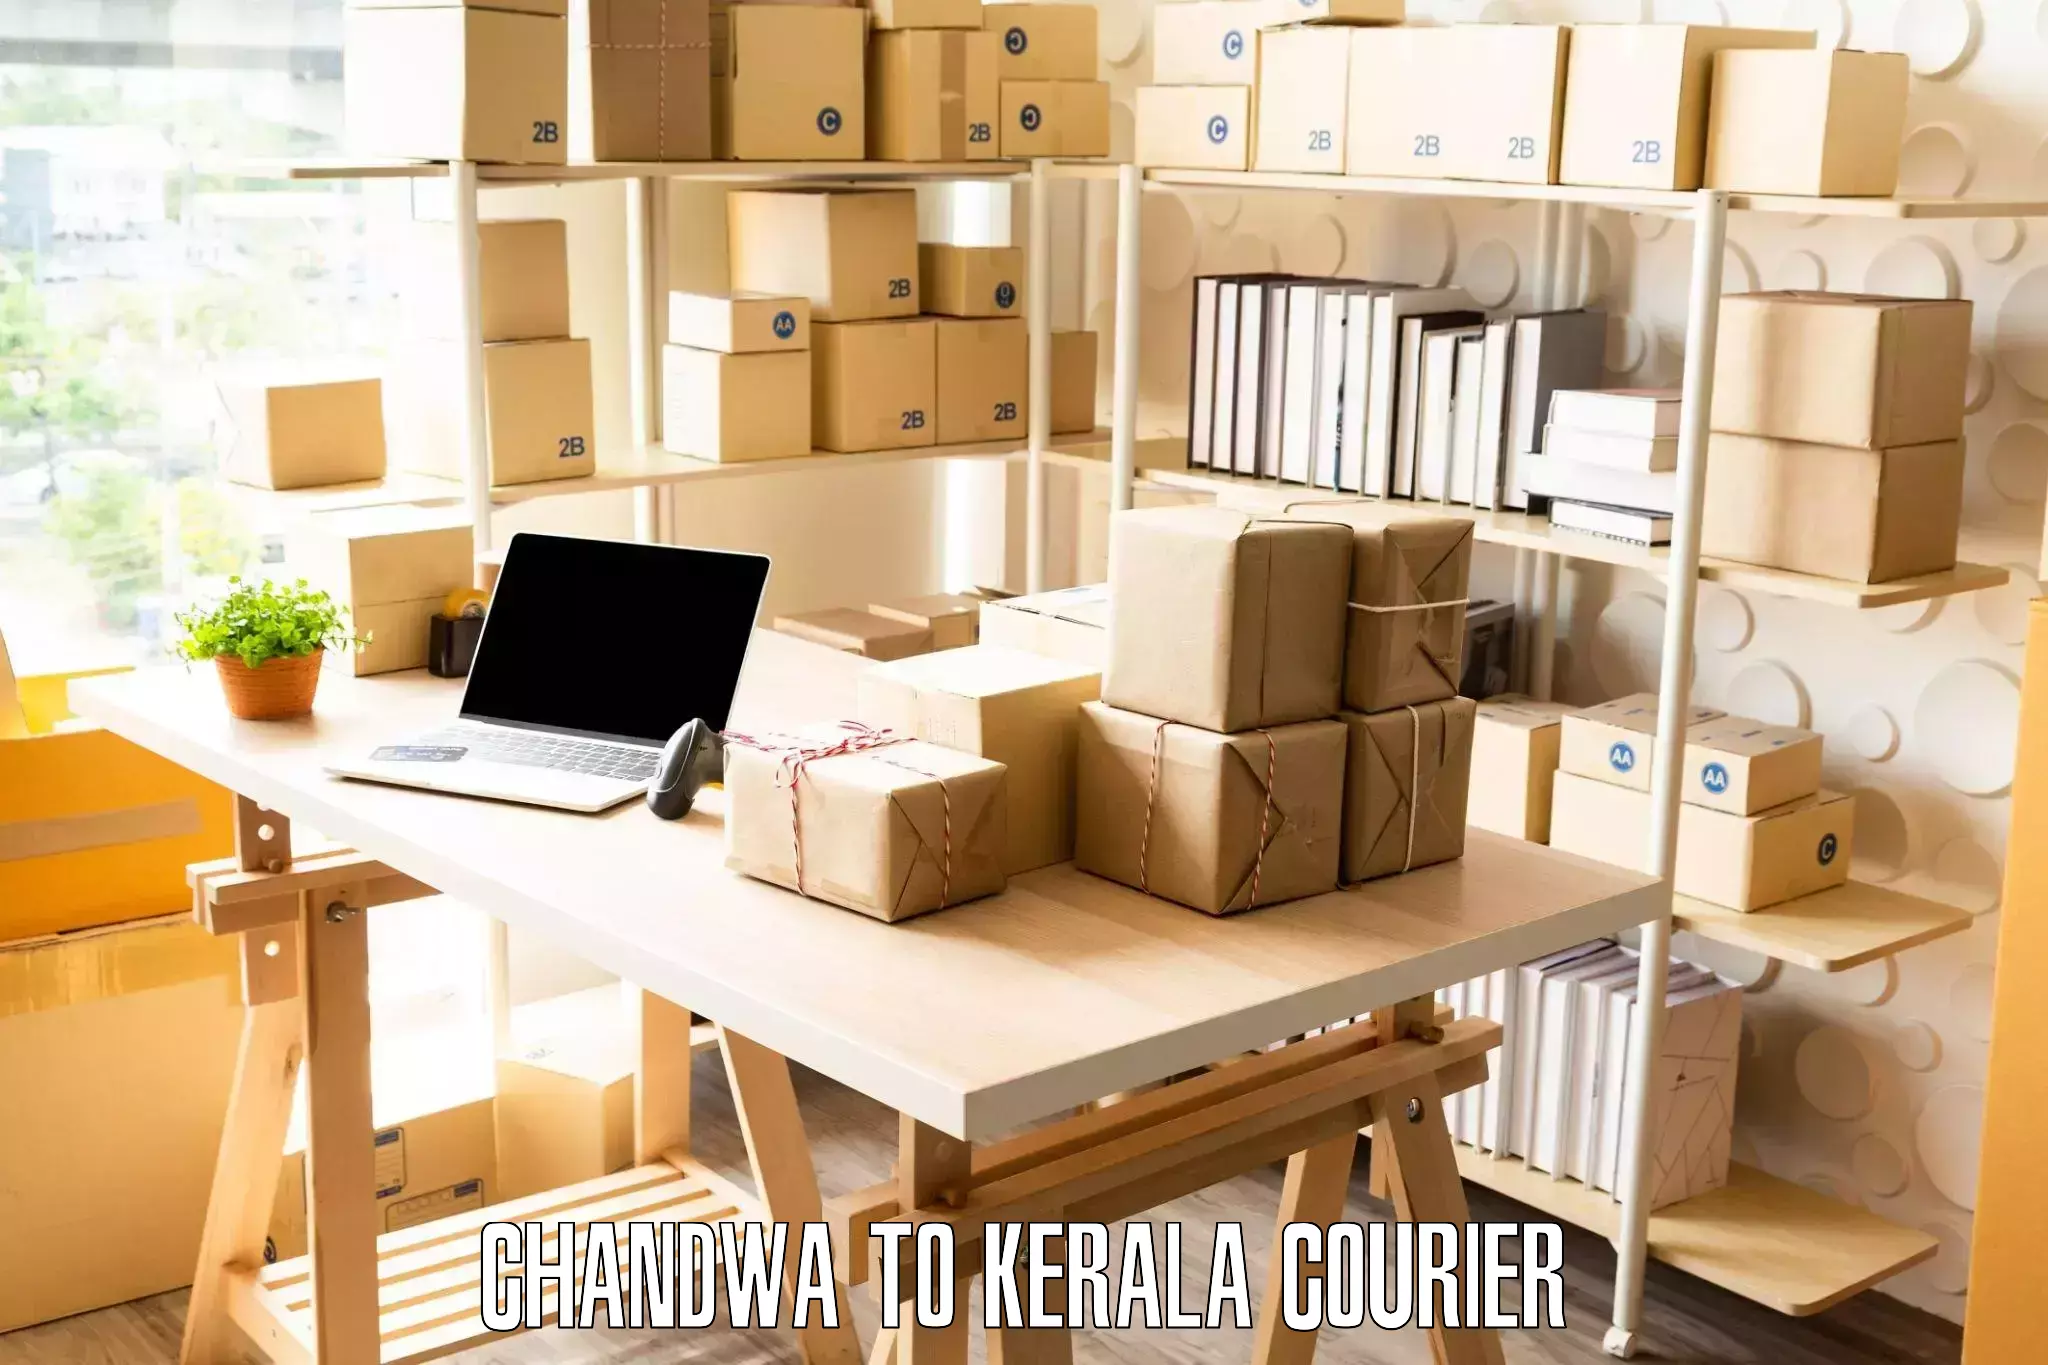 Professional home movers Chandwa to Kannur